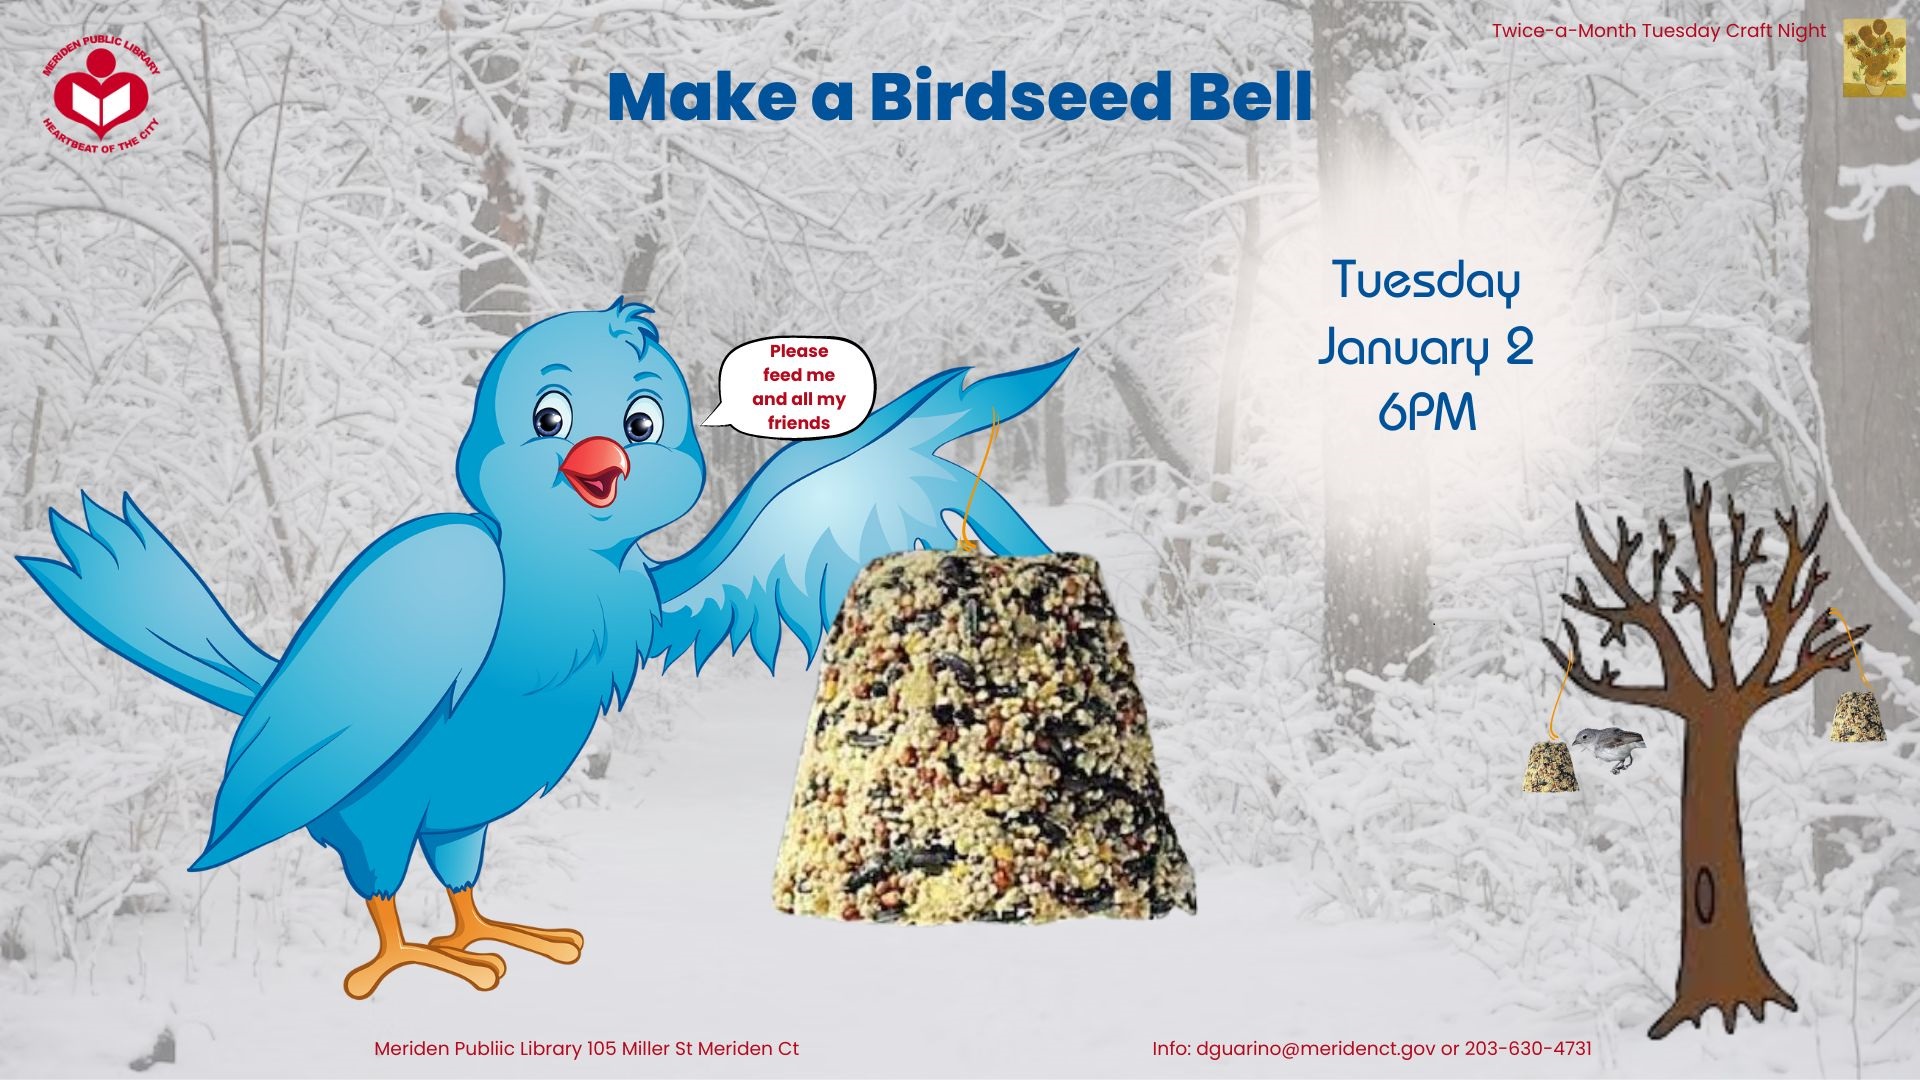 Bluebird on the left holding a birdseed bell with a background of trees and birdseed bells hanging from the front one